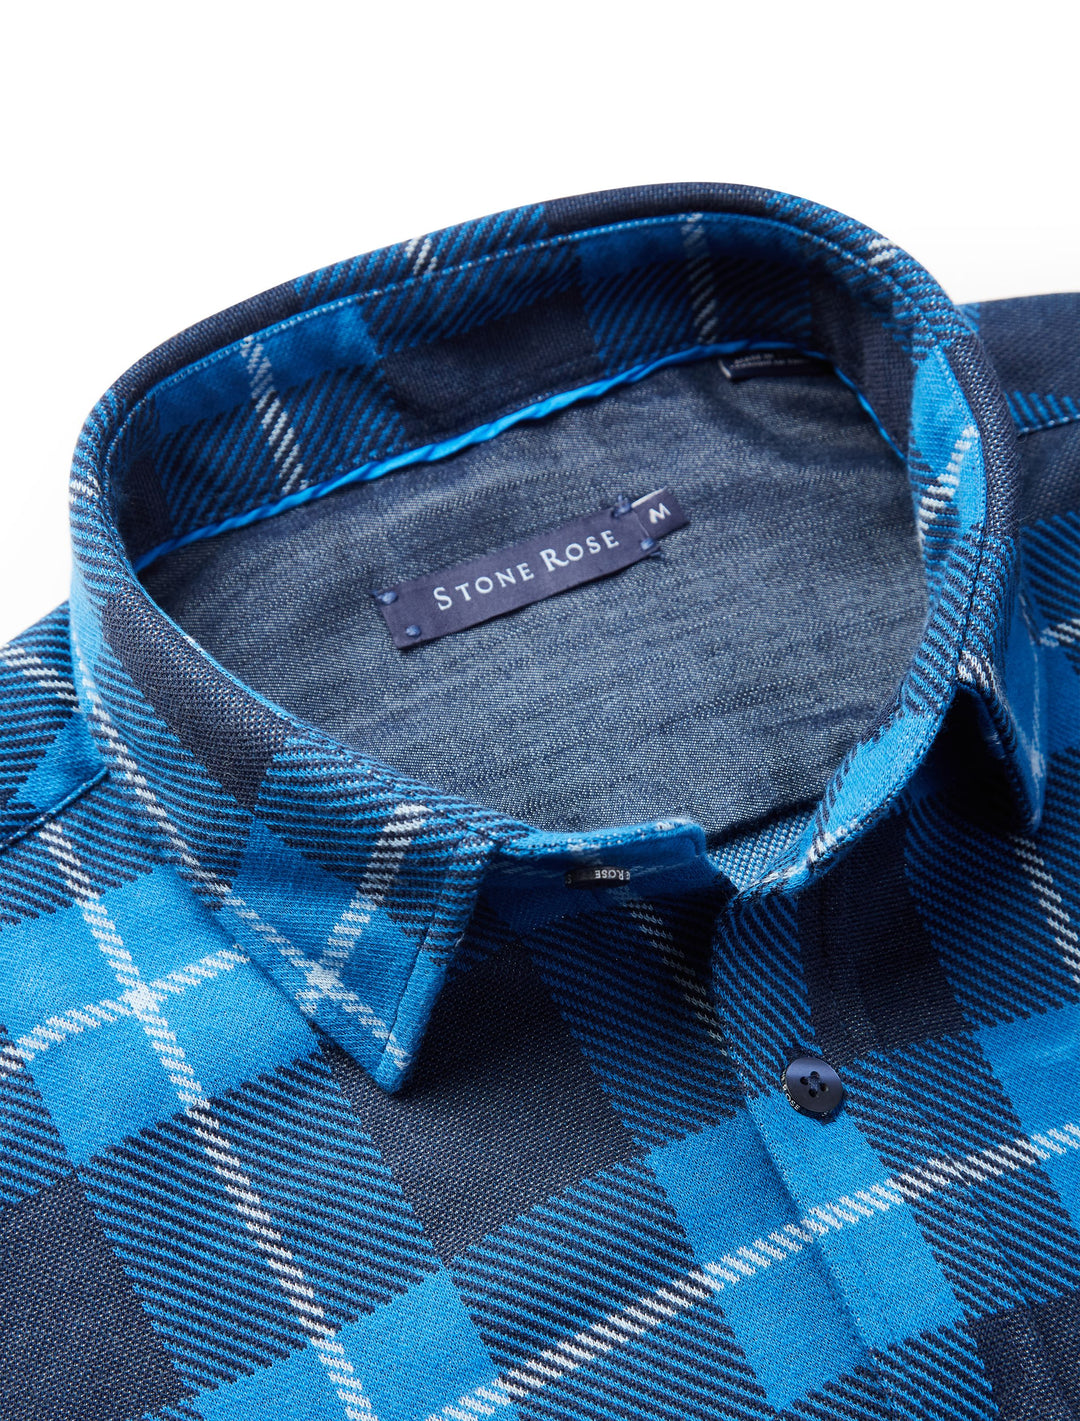 LONG SLEEVE FLANNEL CHECK SHIRT (BLUE) - STONE ROSE